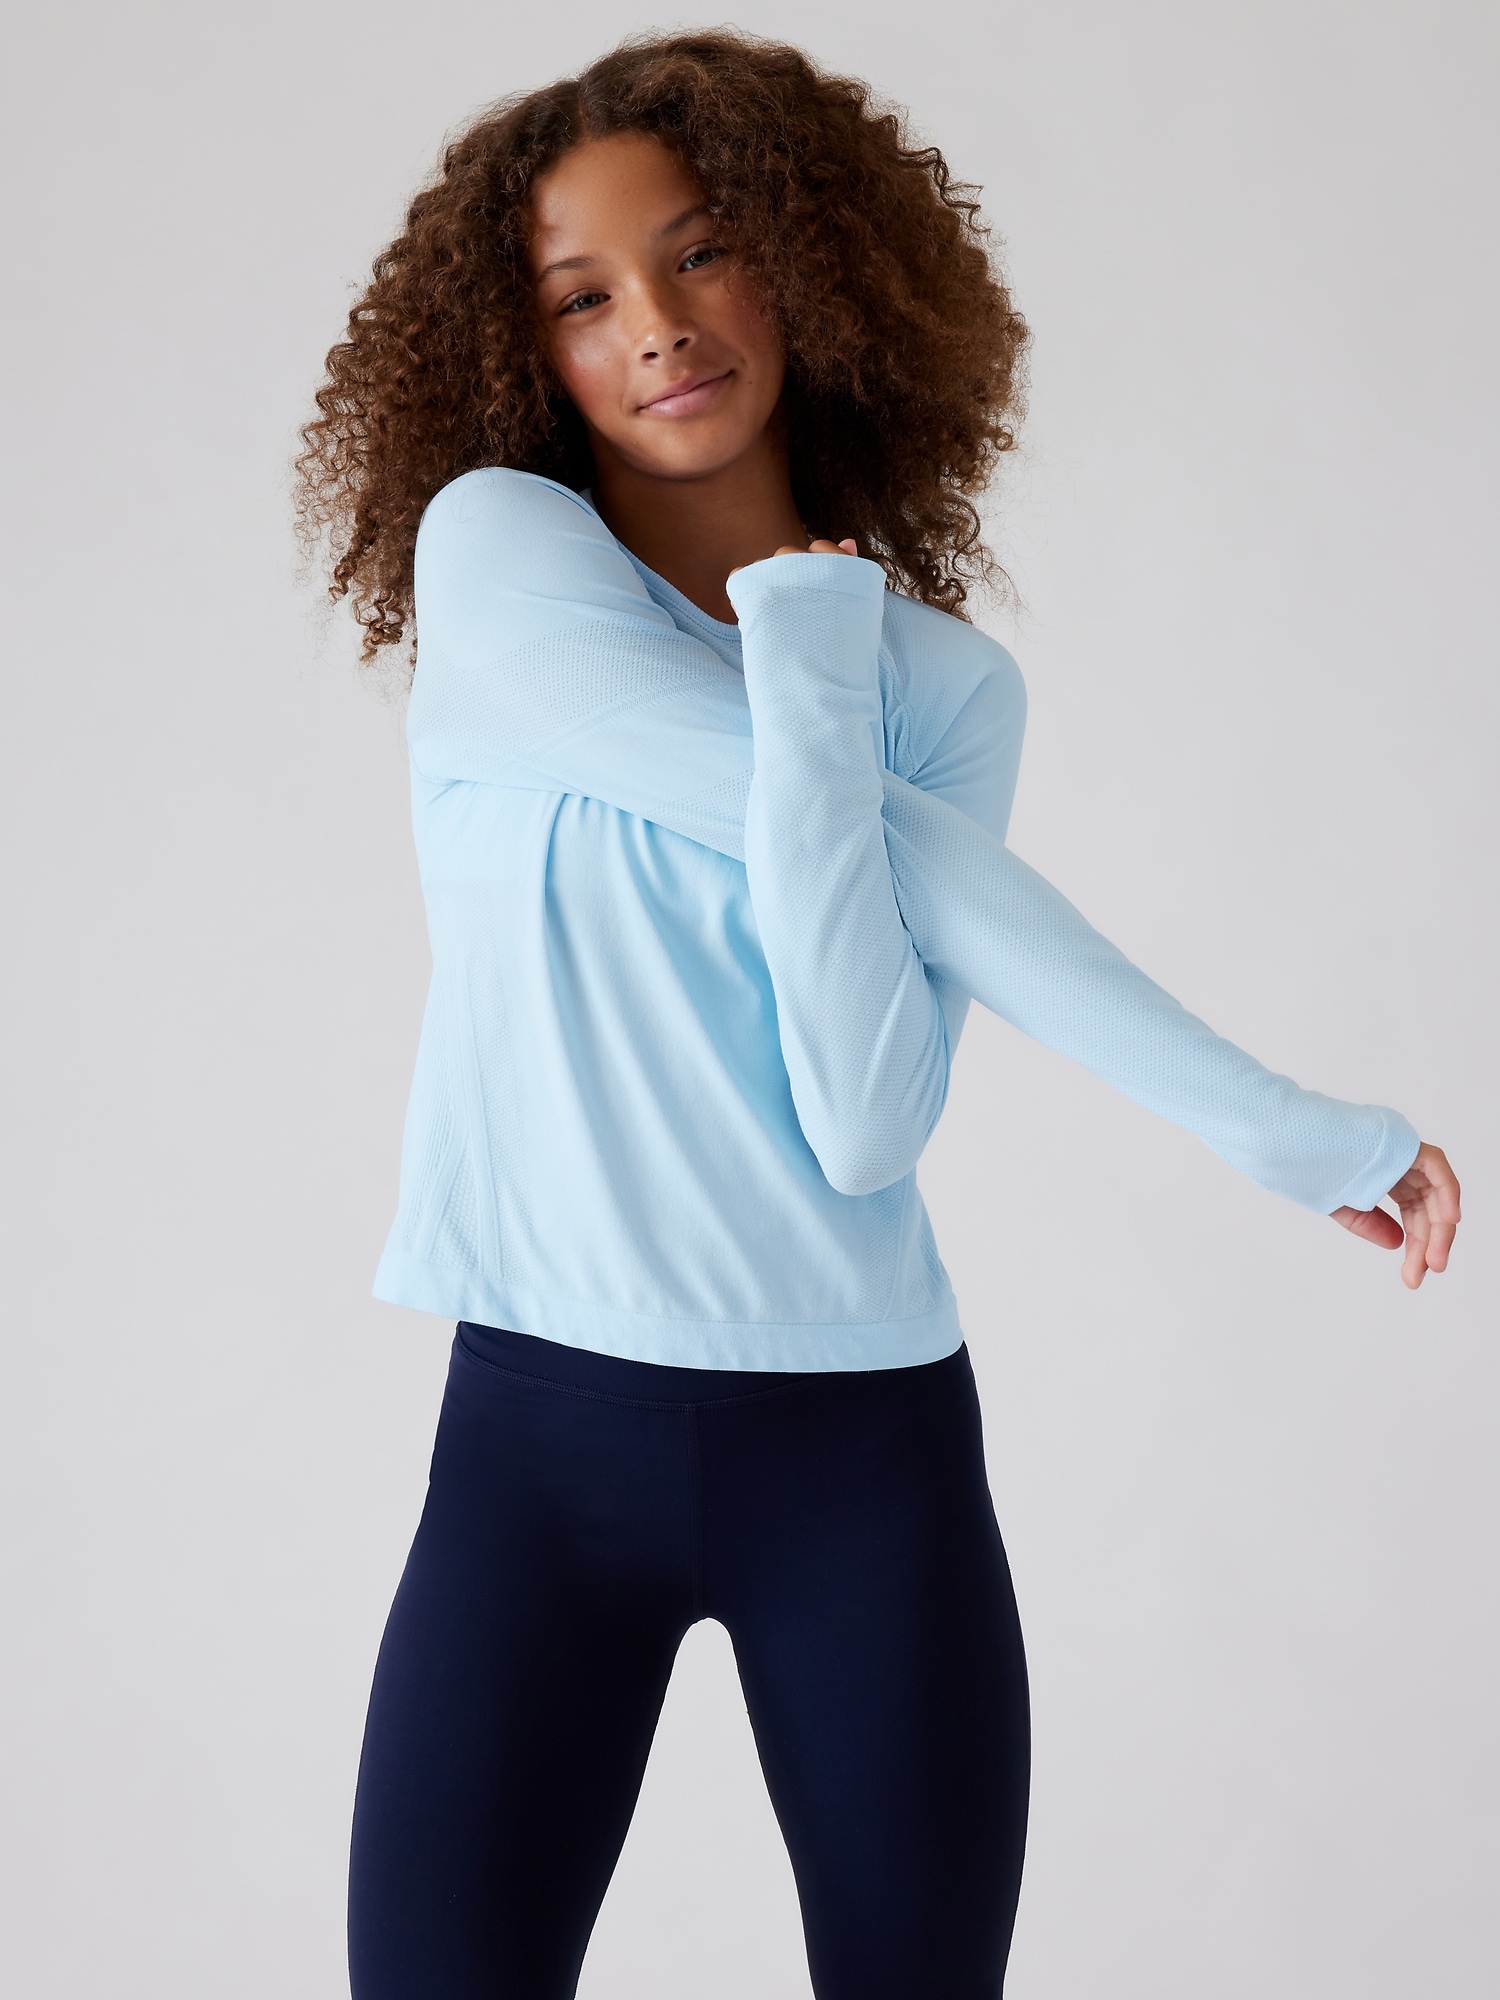 Seamless Sportswear, Tights, tops and more